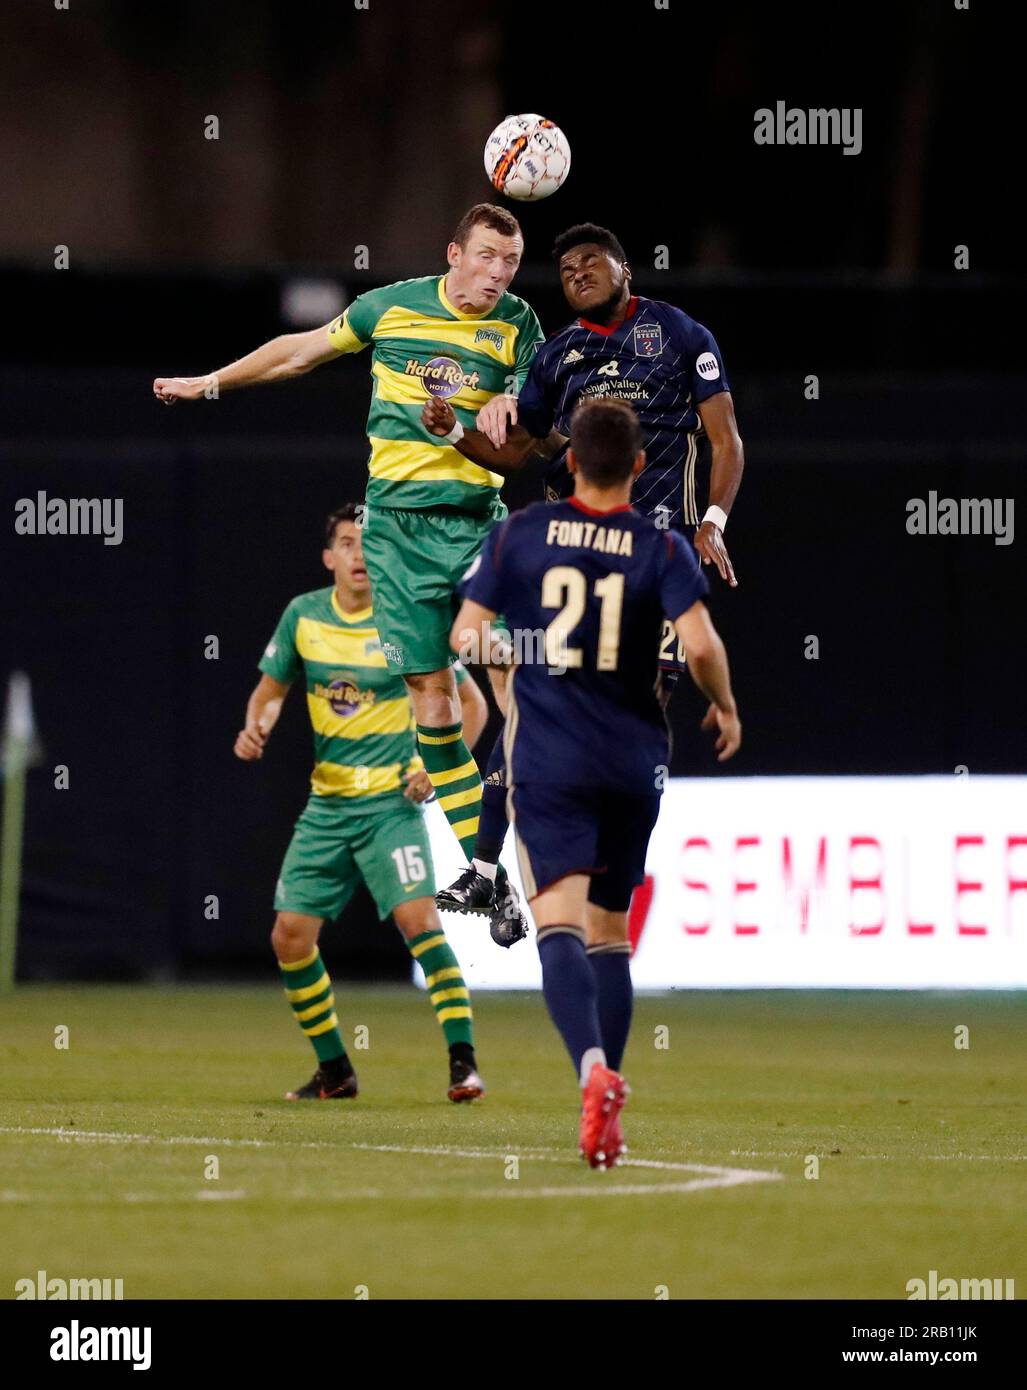 MARCH 24, 2018 - ST. PETERSBURG, FLORIDA: Tampa Bay Rowdies defender Neill Collins, left, during a match against the Bethlehem Steel at Al Lang Field. Collins was named the Head Coach at Barnsley F.C. on July 6, 2023. Stock Photo